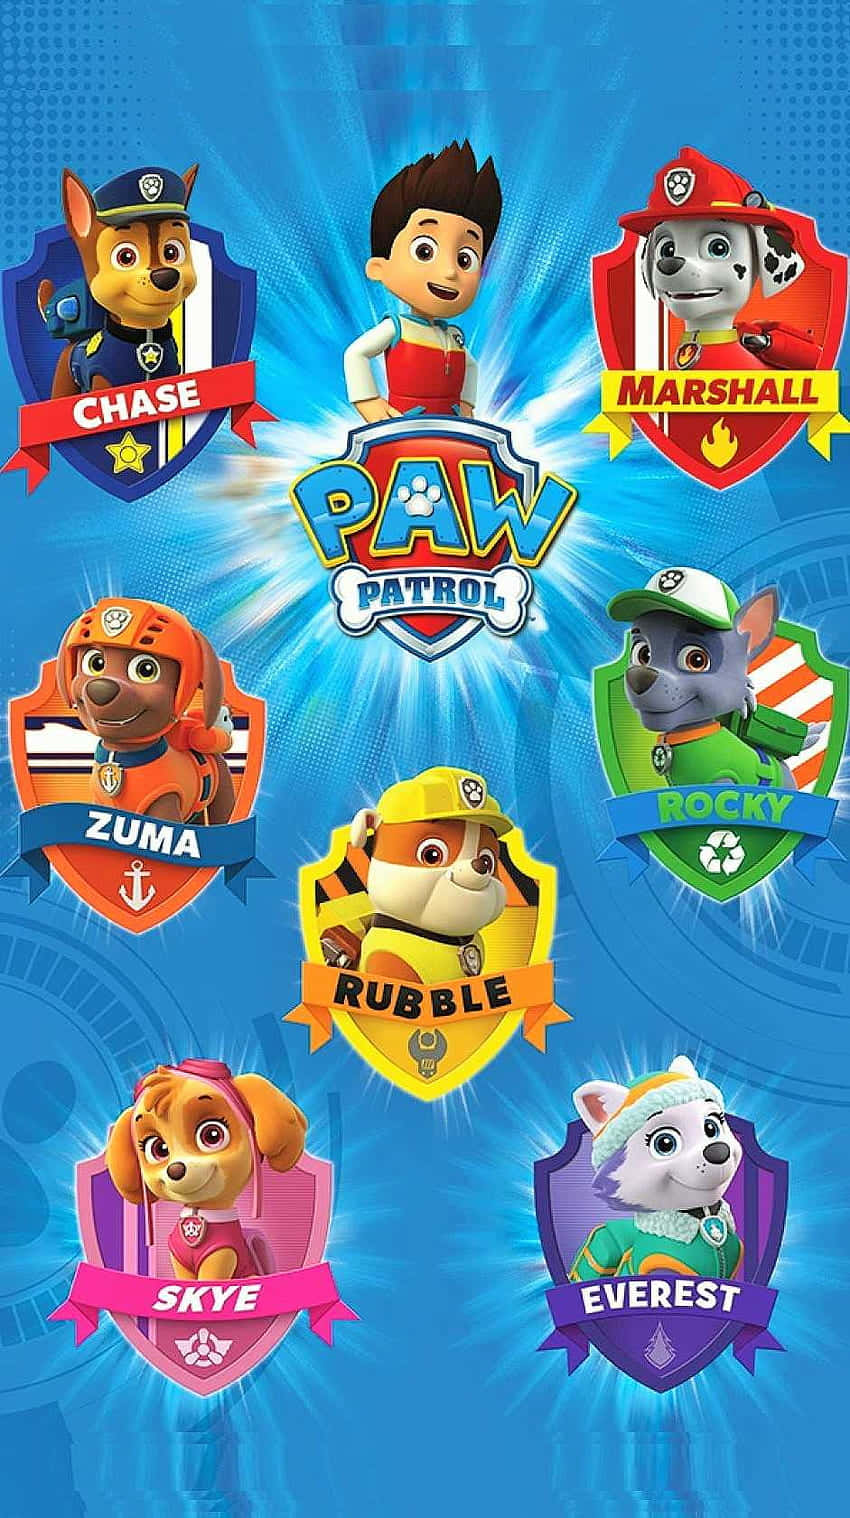 Let's fly together! Skye of Paw Patrol takes to the sky. Wallpaper